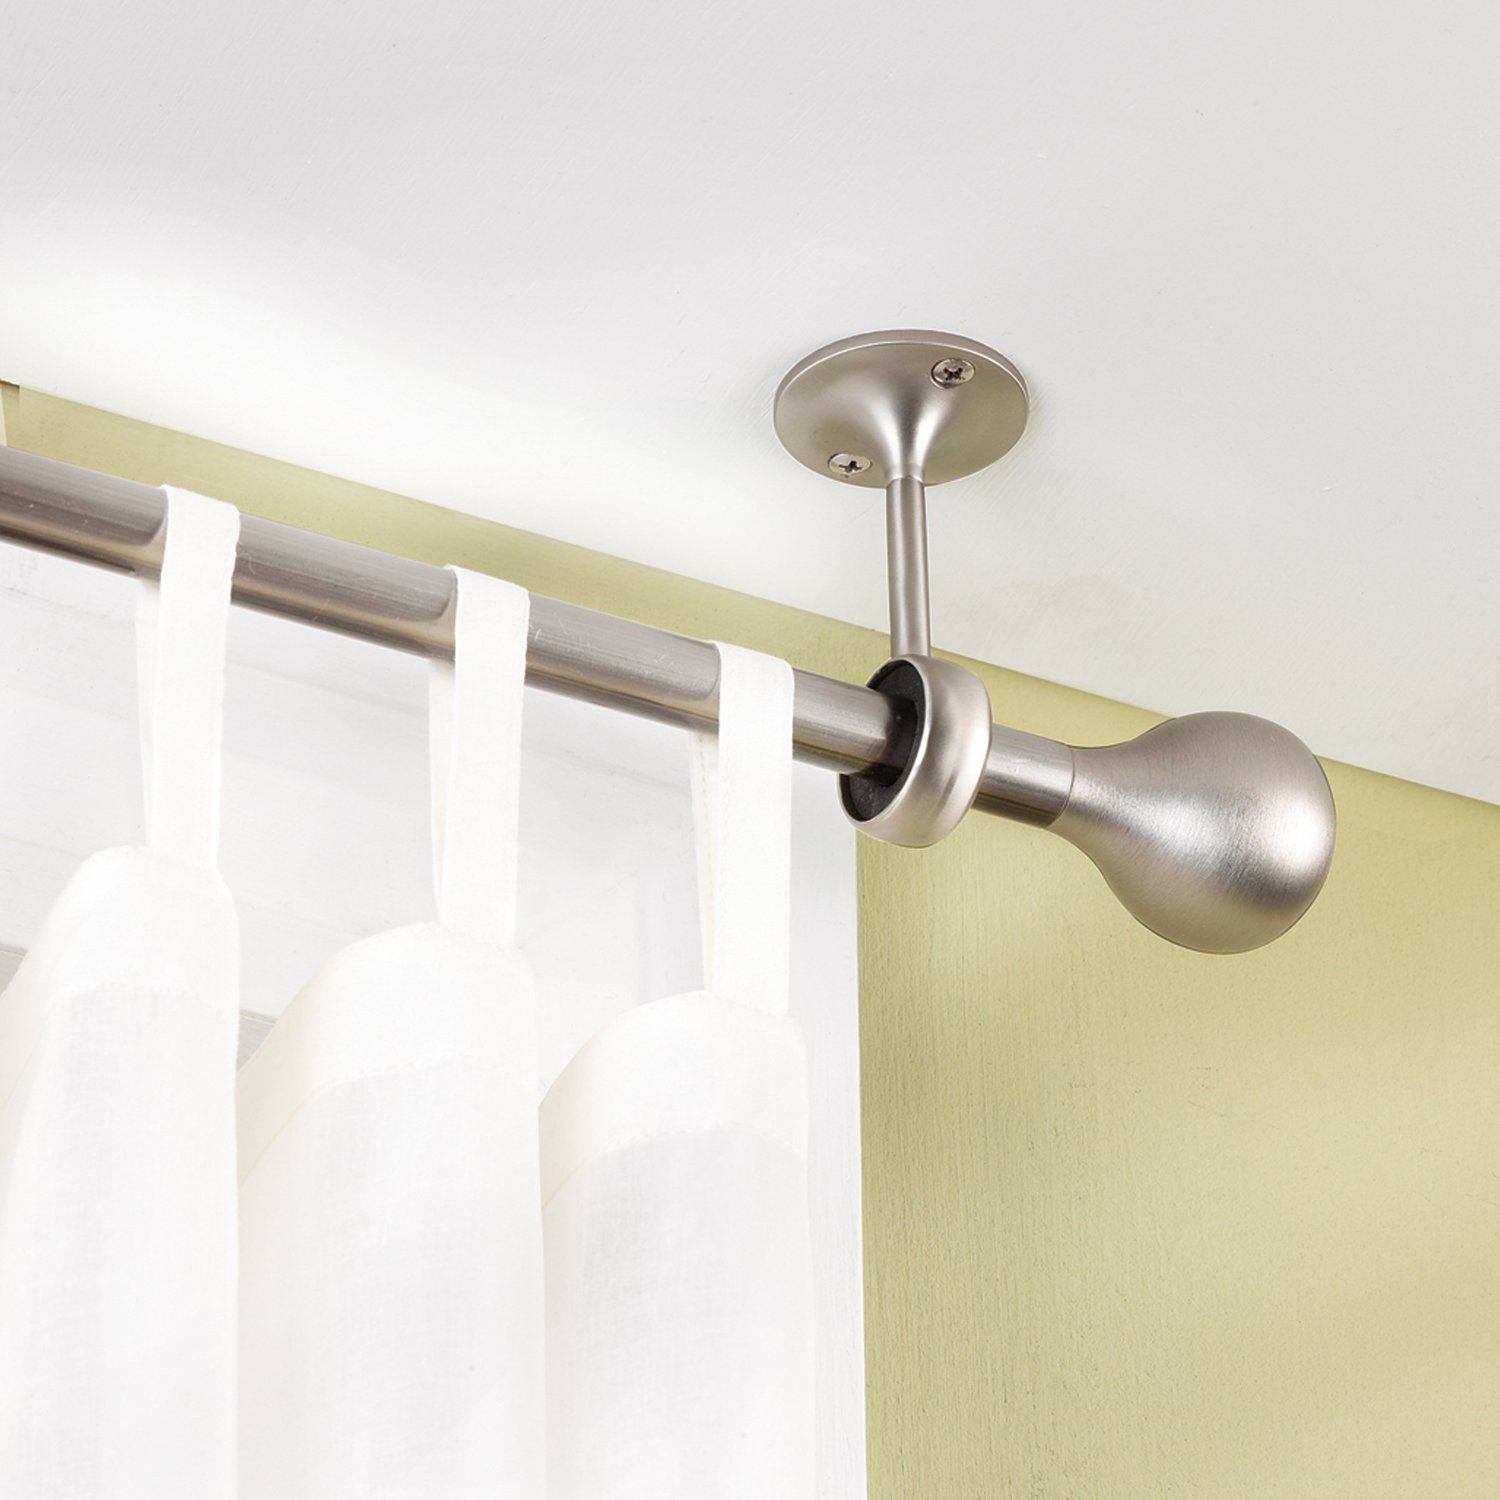 Fix Curtain Pole To Ceiling Curtain Menzilperde With Shower Curtains Poles (View 20 of 25)